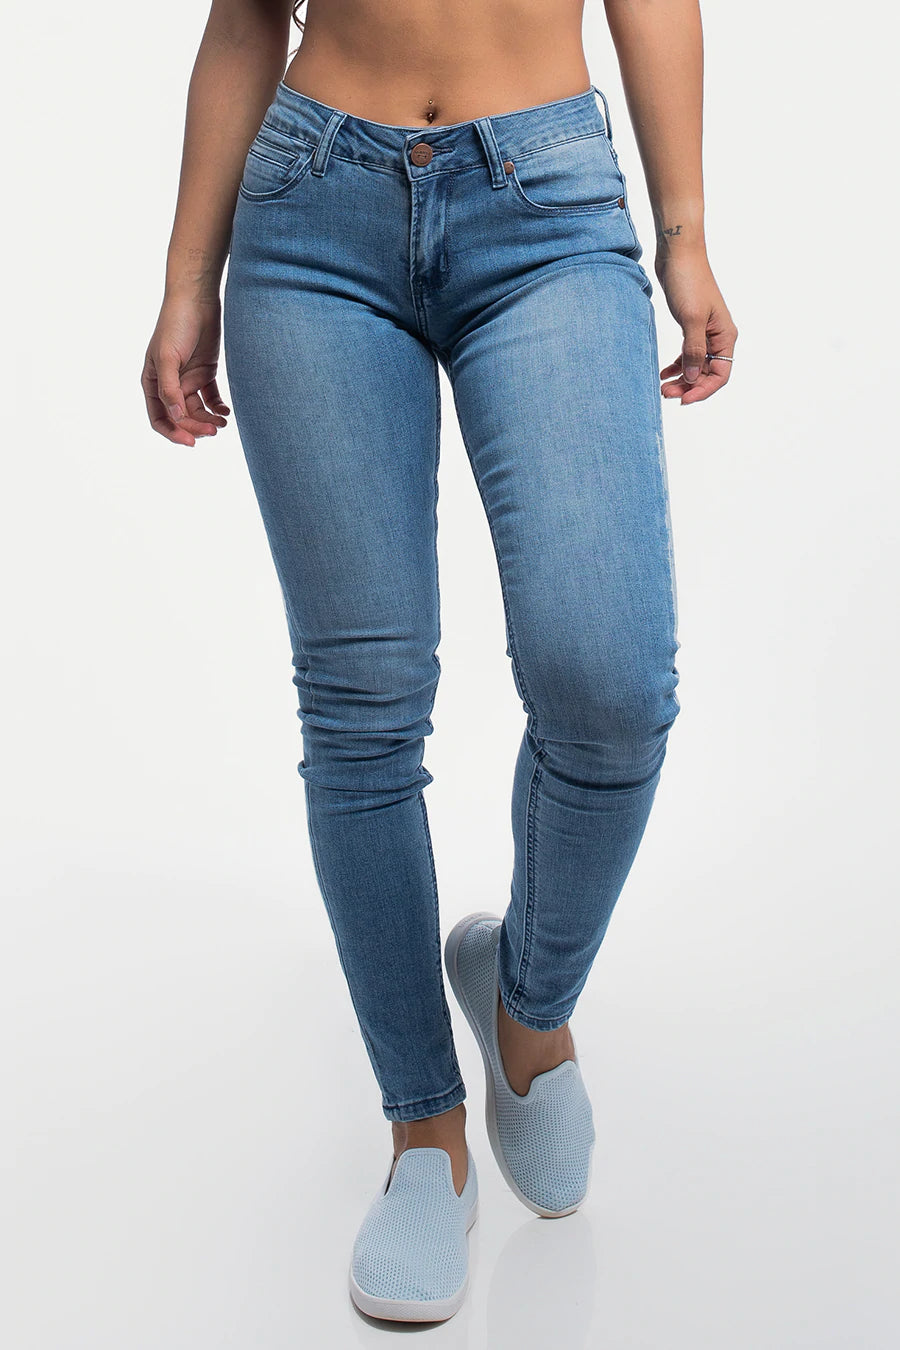 Womens Slim Athletic Fit Jeans, Barbell Apparel